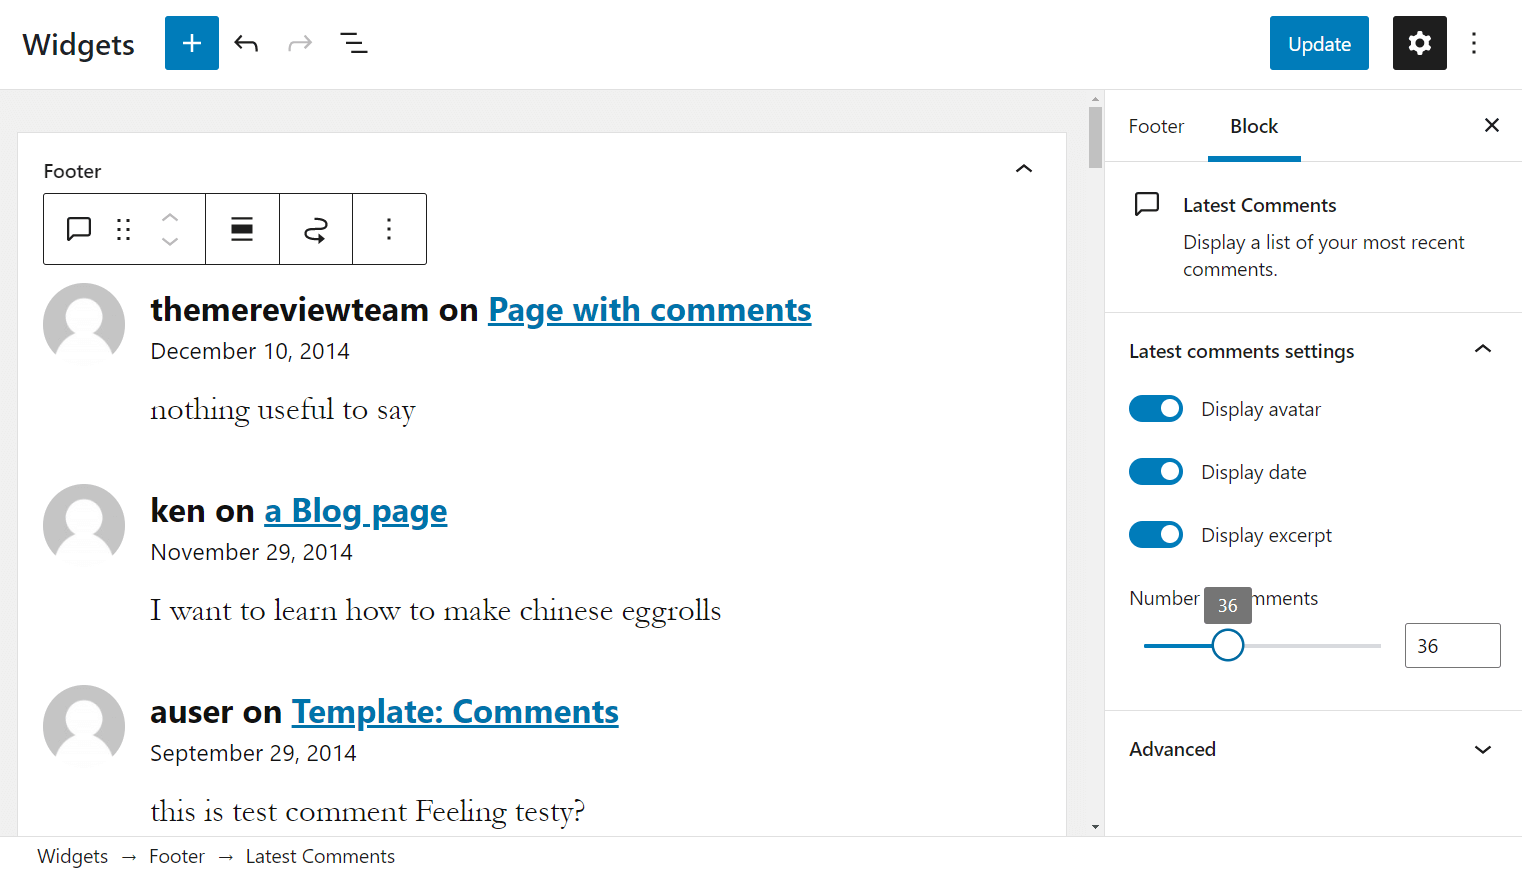 A widget showing the latest comments.